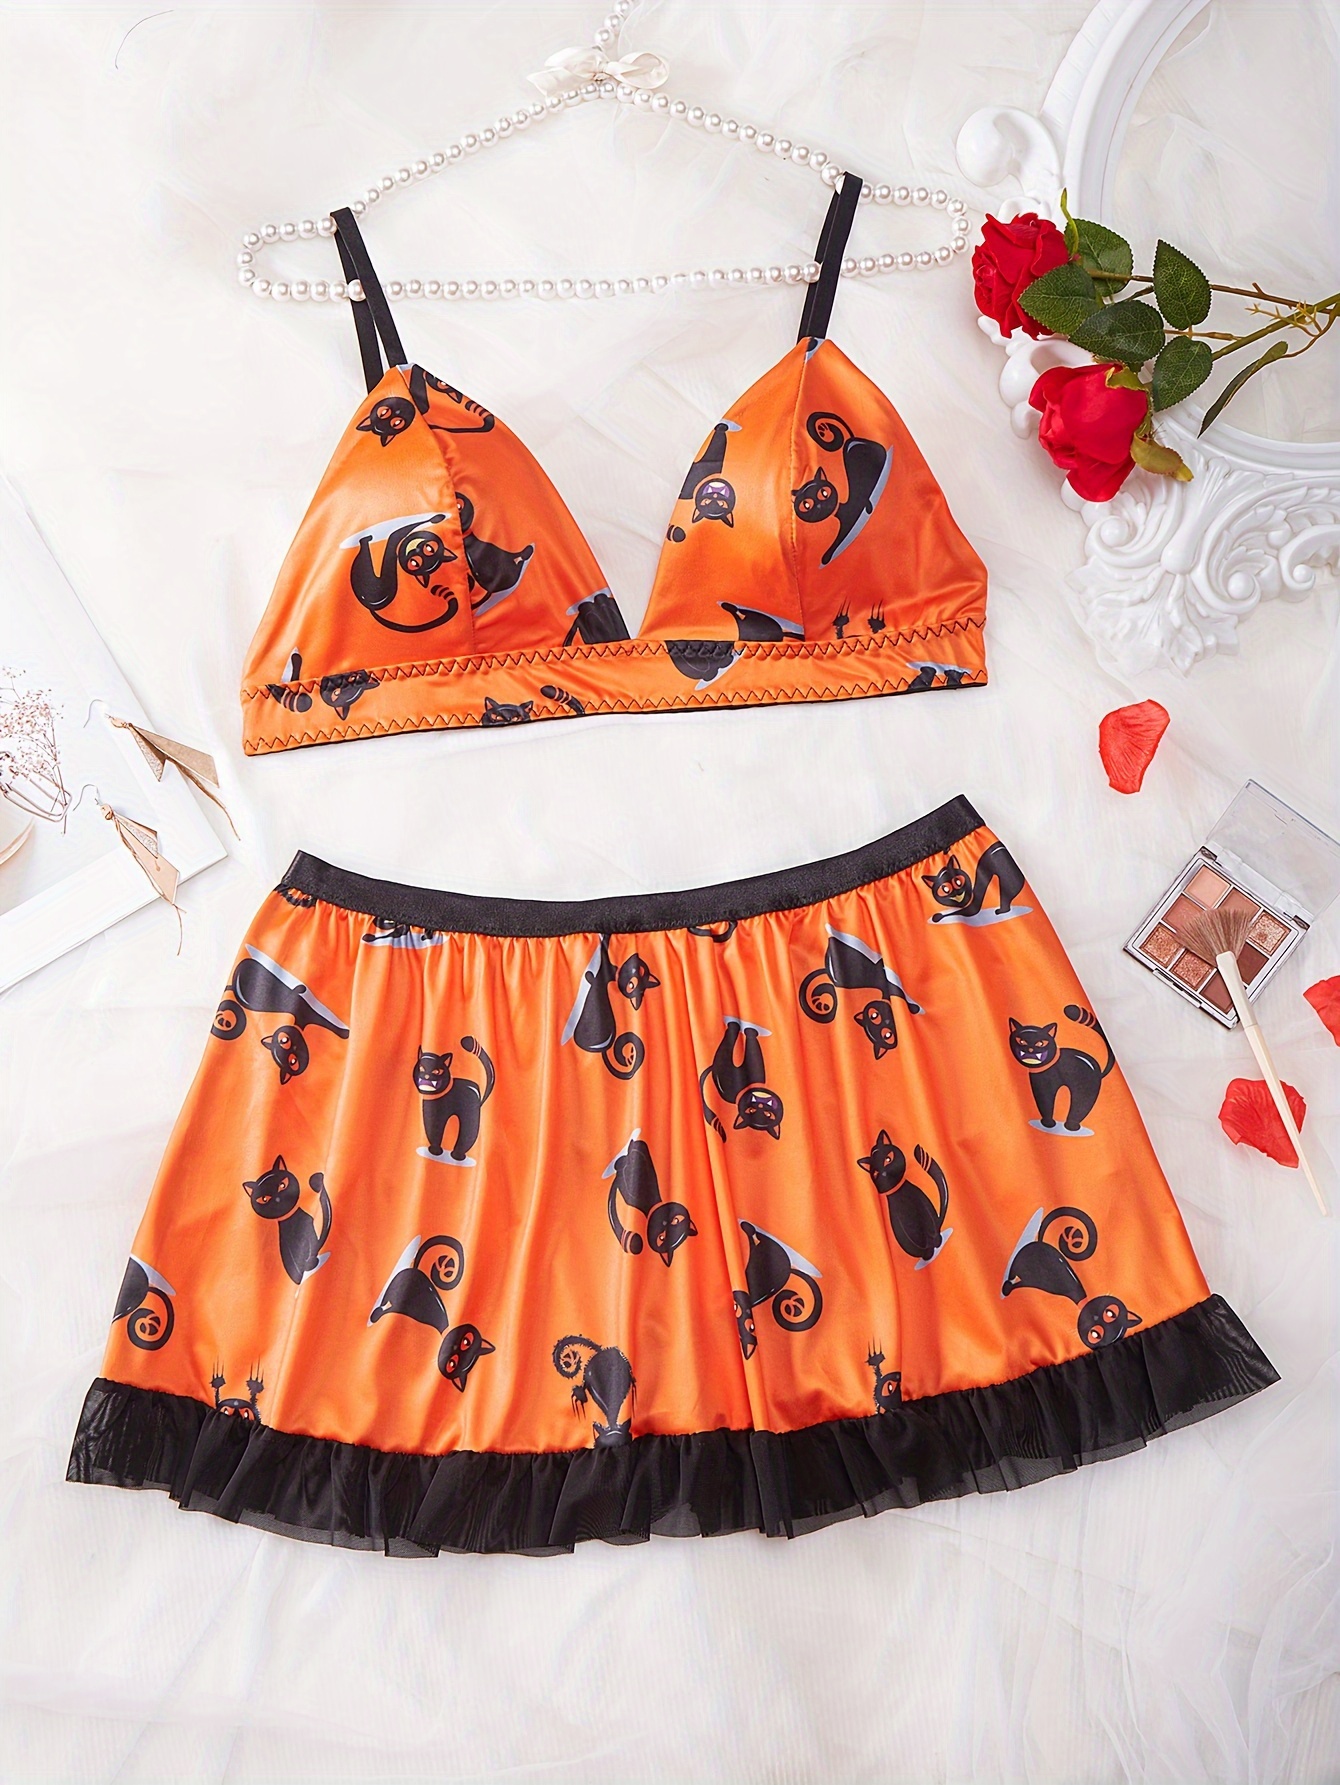 Homely Women's Sexy Lingerie Underwear Women Sexy Cosplay Costume Cute Sexy  Lingerie Set Lace Strappy Camis And Panty Babydolls Nightwear Outfit